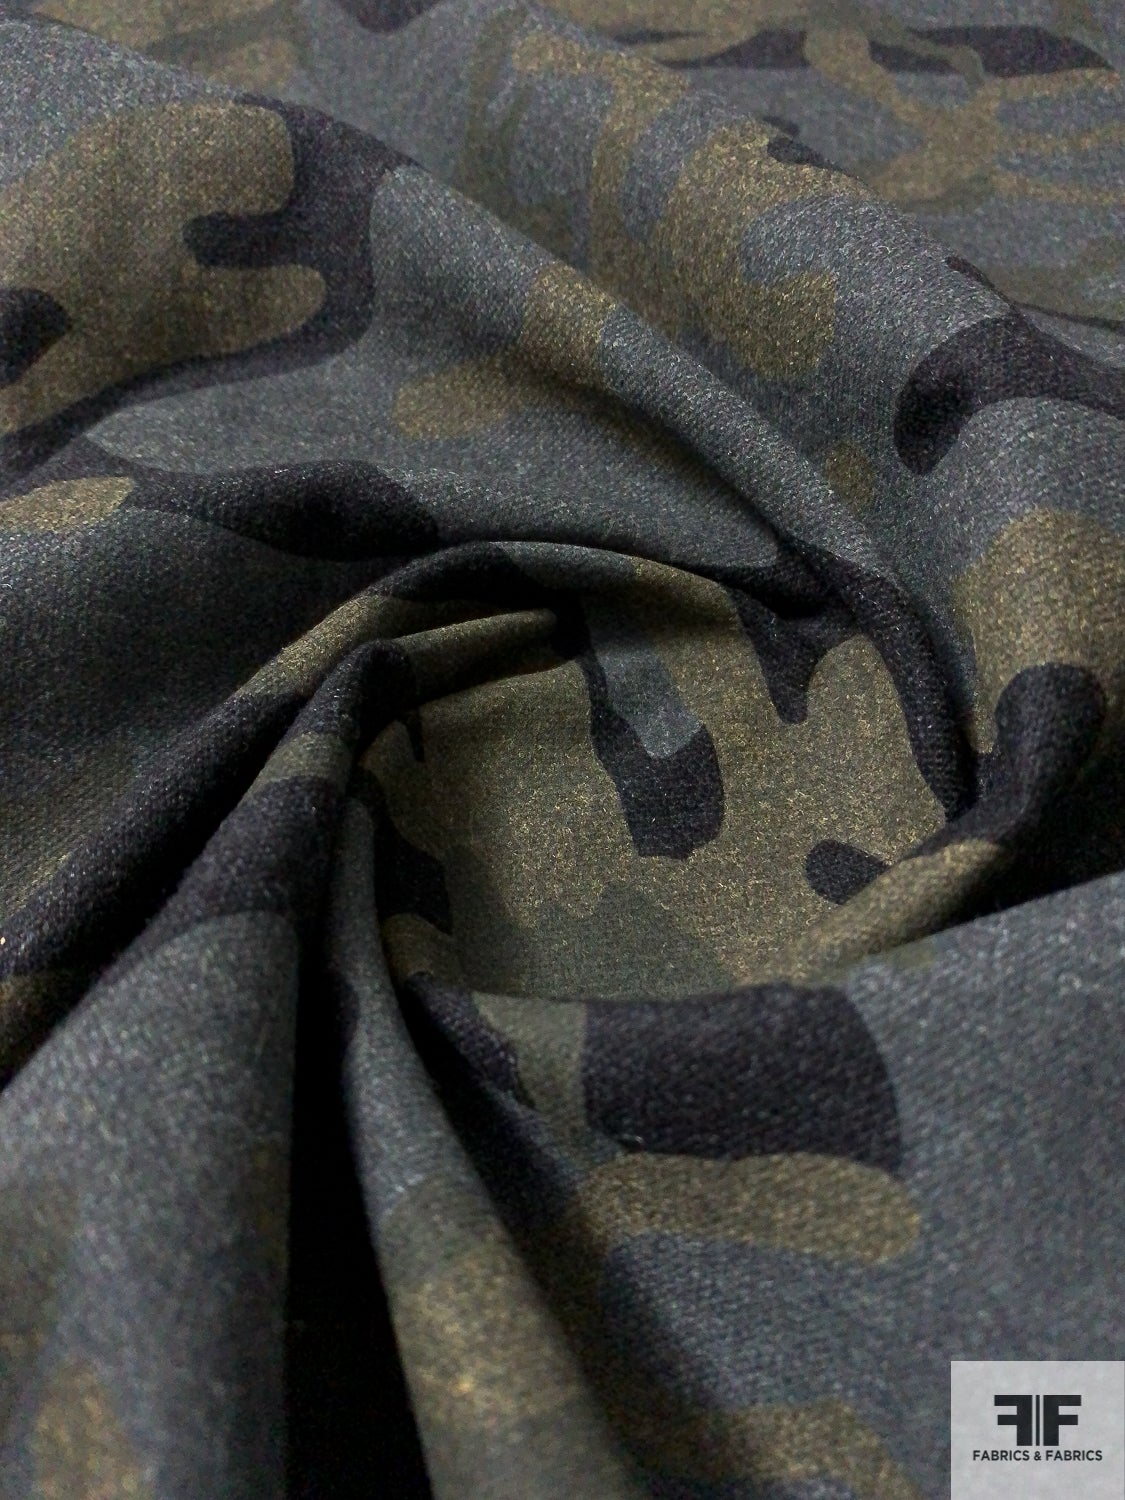 Italian Camouflage Printed Plain Weave Suiting - Army Green / Grey / Black